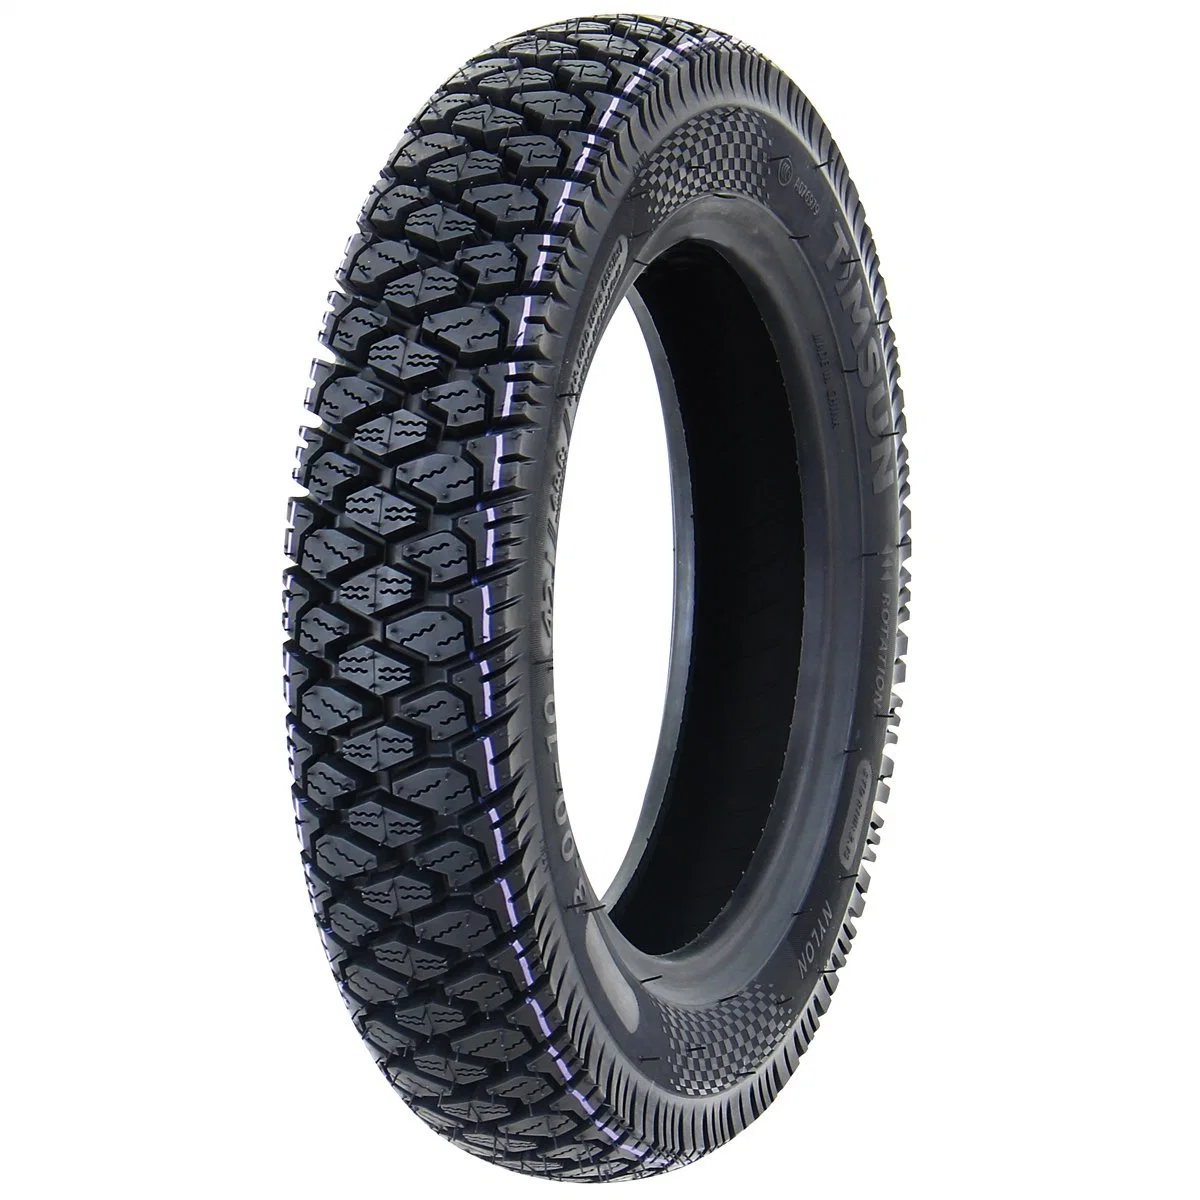 Super Quality Motorcycle Parts TS-825 Pattern110/80-10 90/90-12 Motorcycle Tubeless Tire